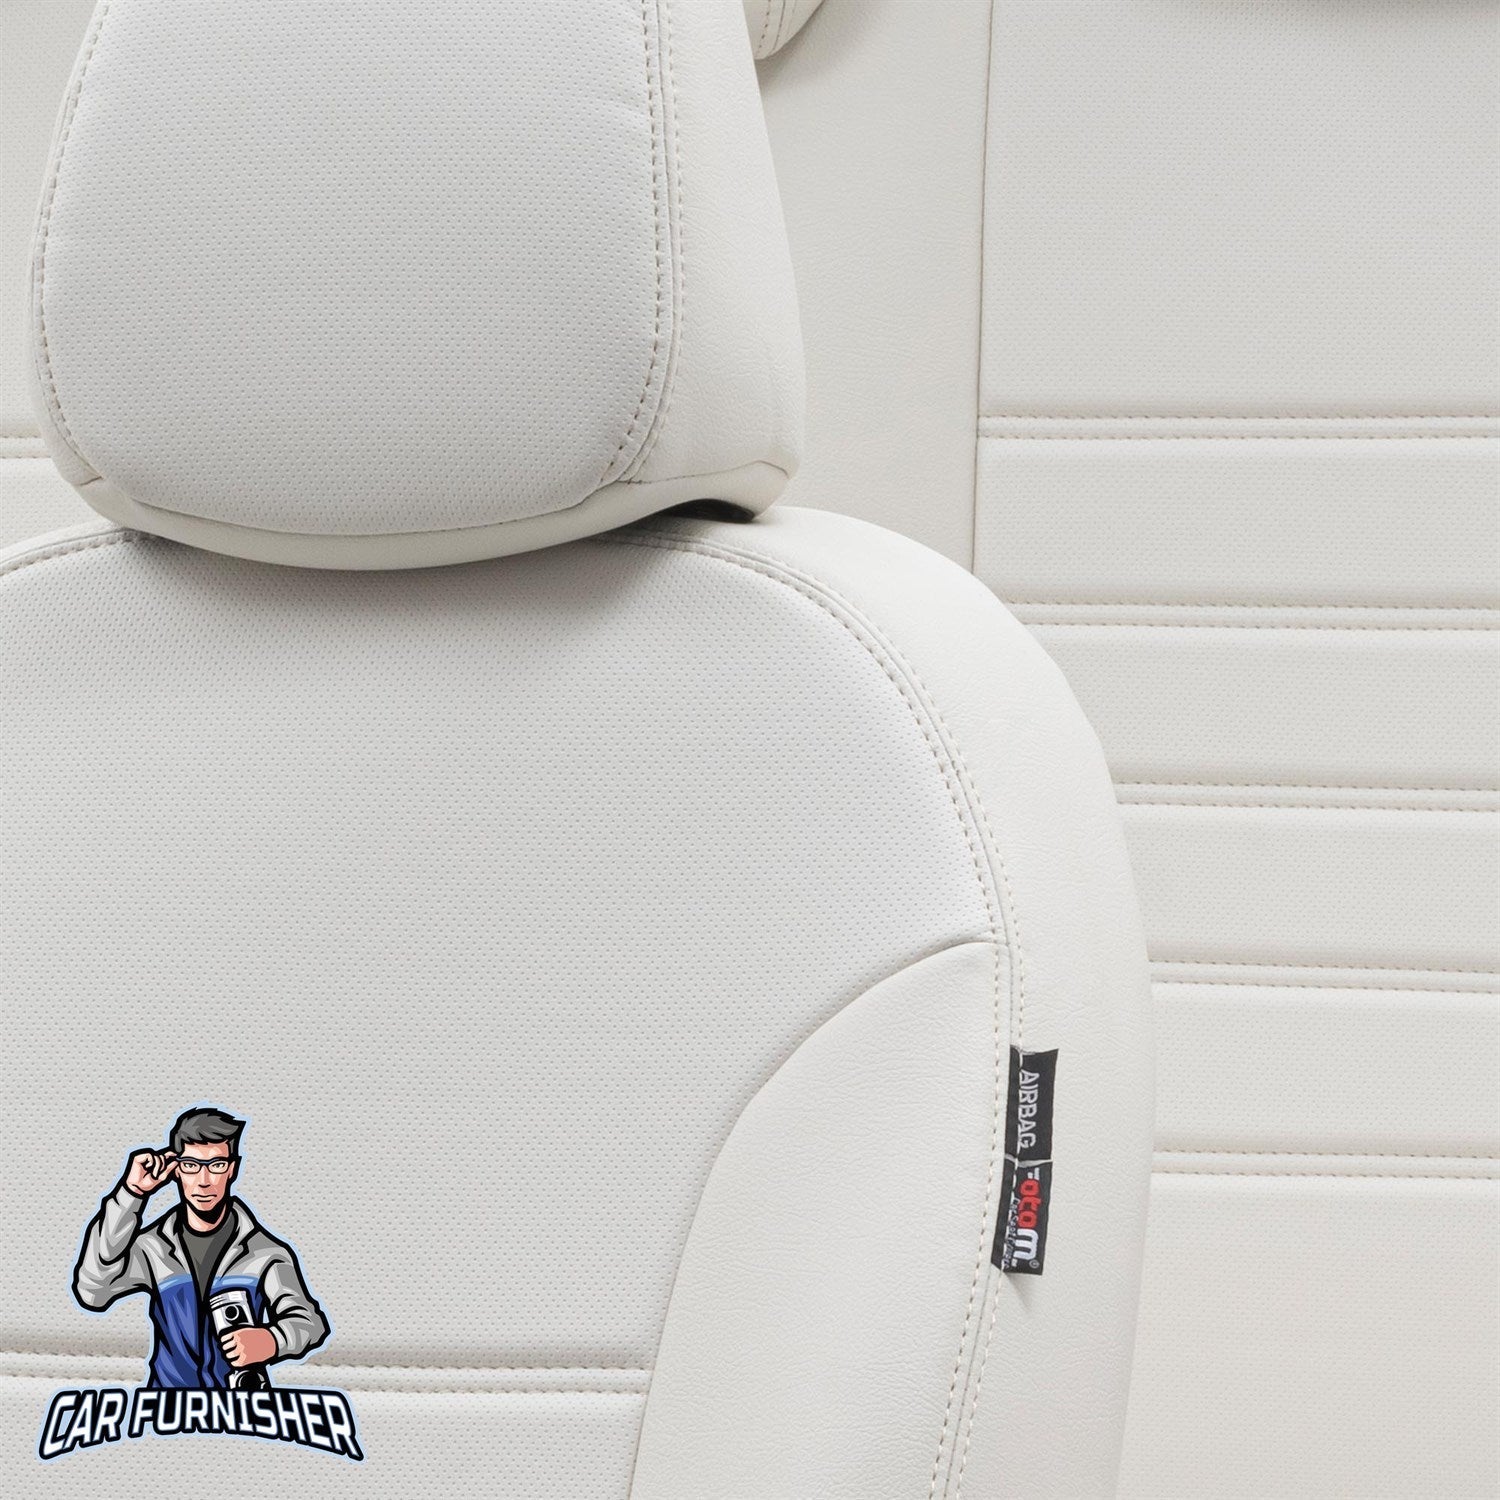 Chery Alia Seat Covers Istanbul Leather Design Ivory Leather